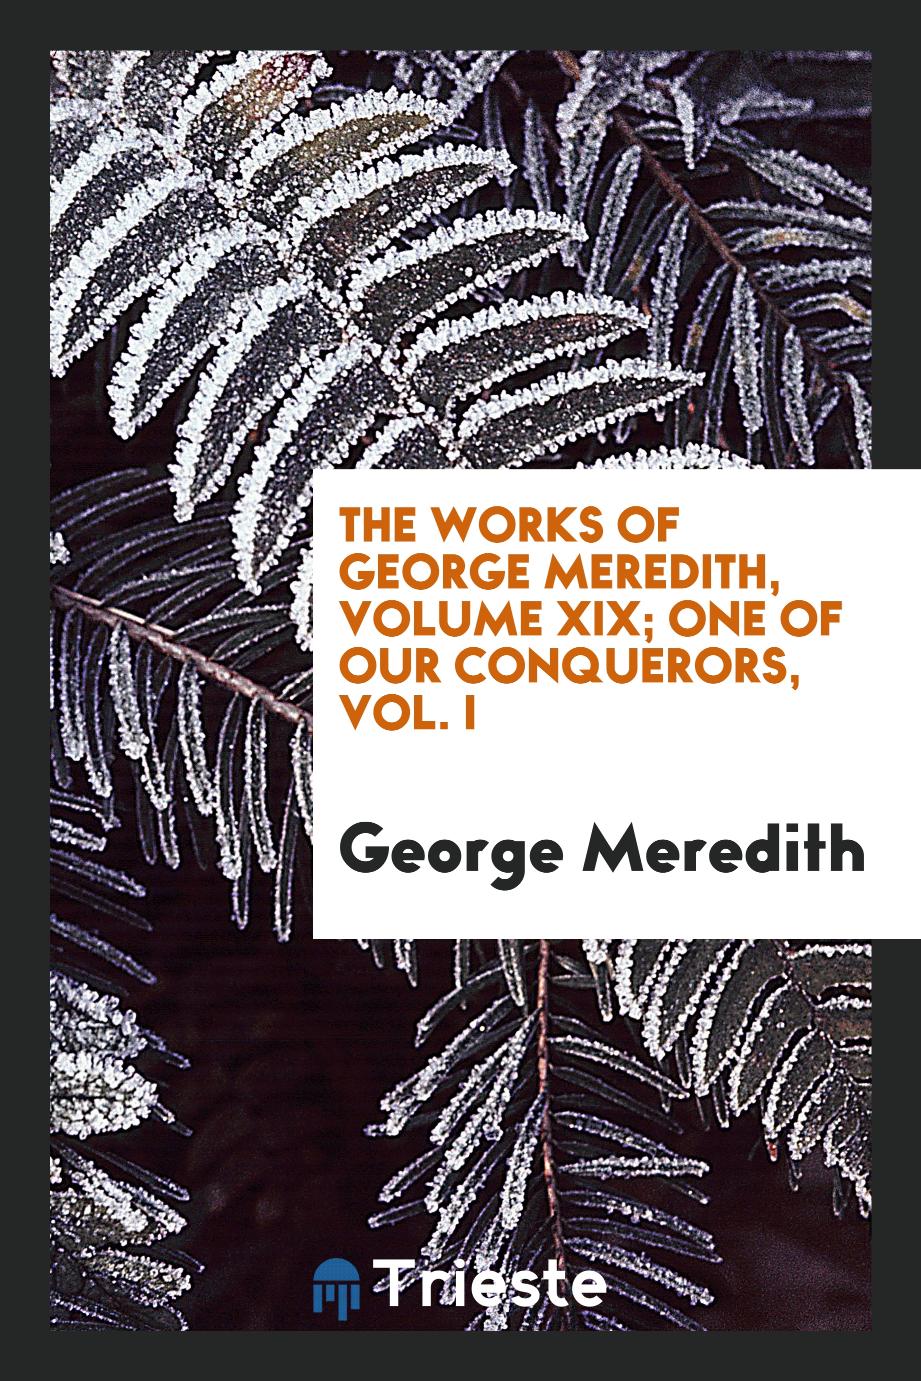 The Works of George Meredith, Volume XIX; One of Our Conquerors, Vol. I